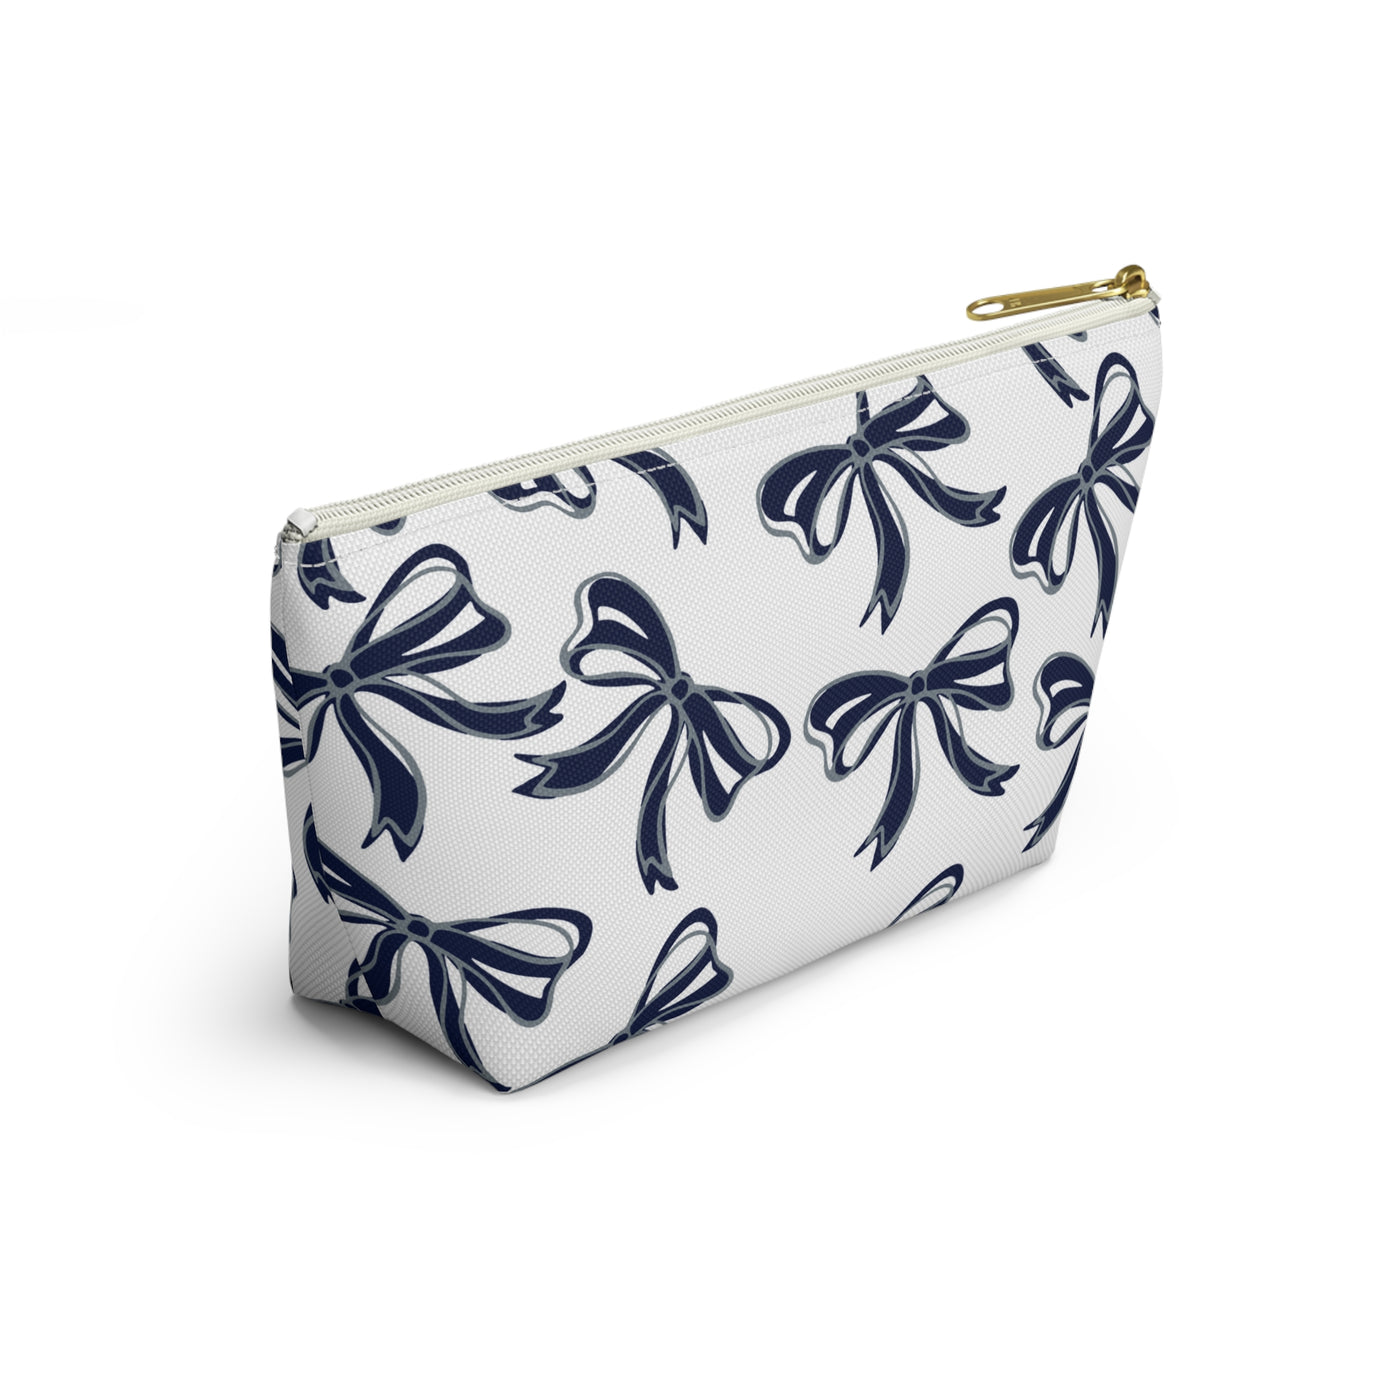 Trendy Bow Makeup Bag - Graduation Gift, Bed Party Gift, Acceptance Gift, College Gift, Monmouth, UConn, Huskies, navy & white,navy and grey